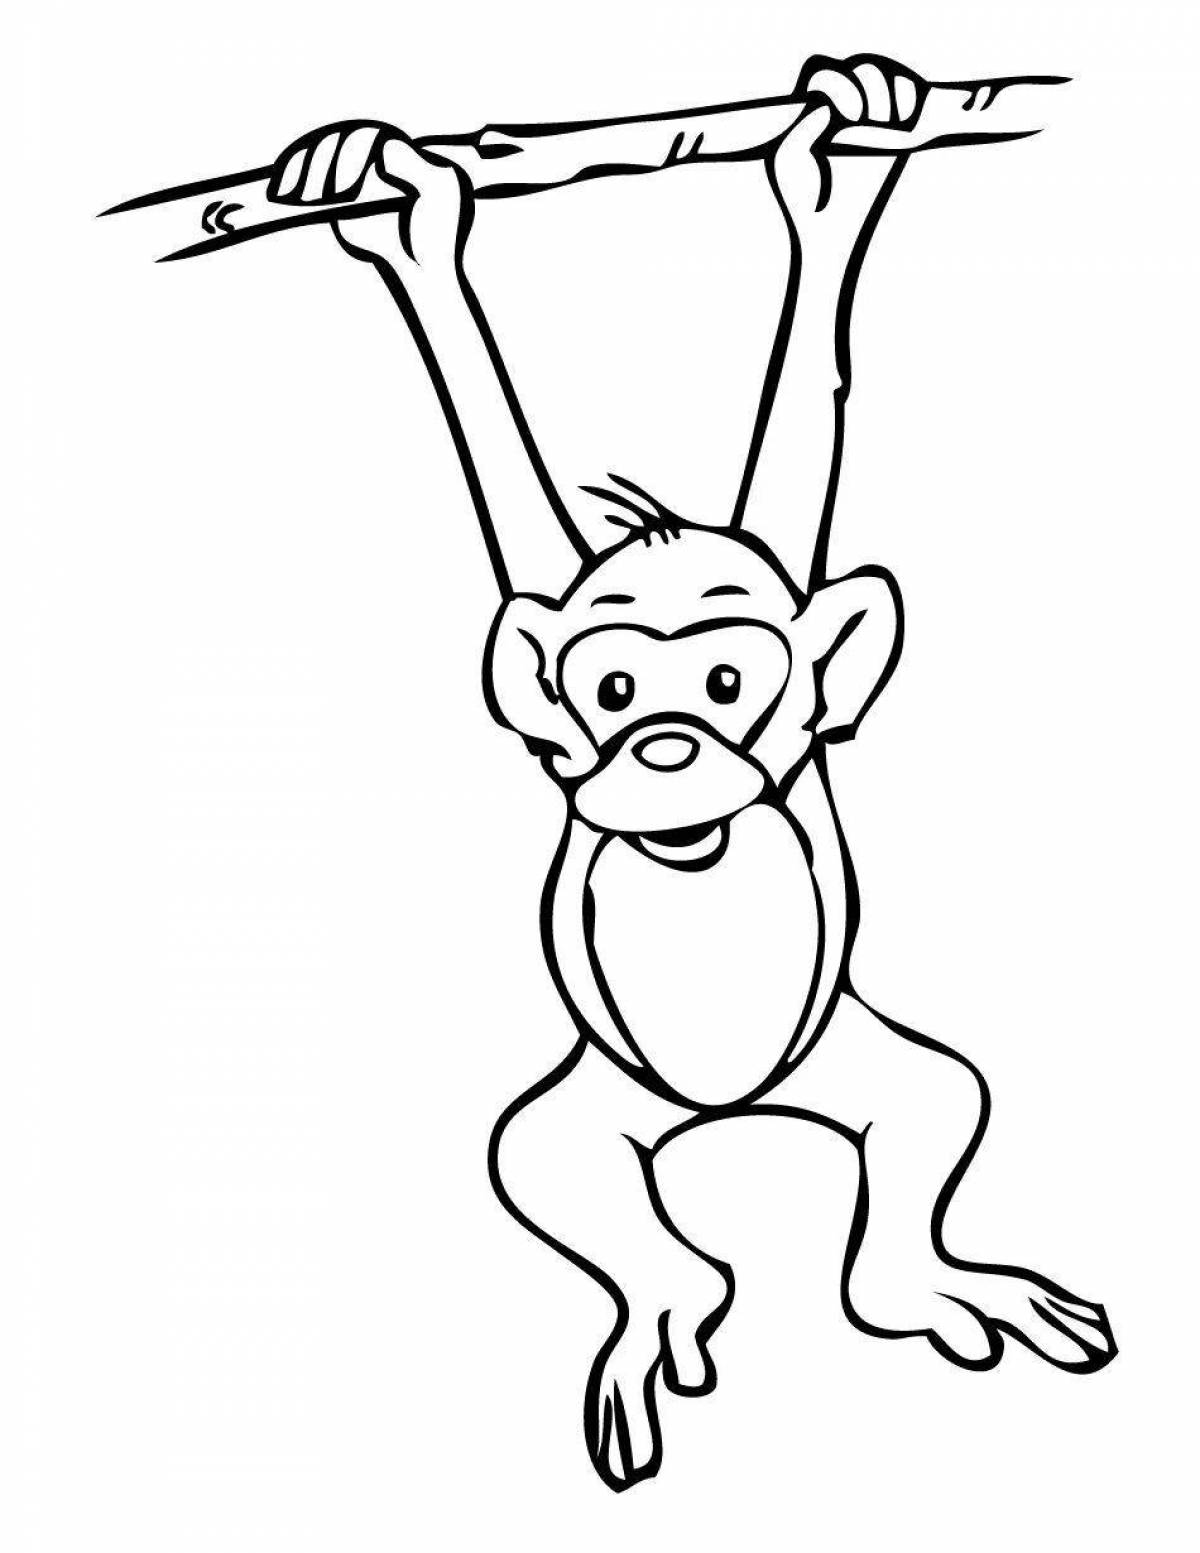 Adorable monkey coloring page